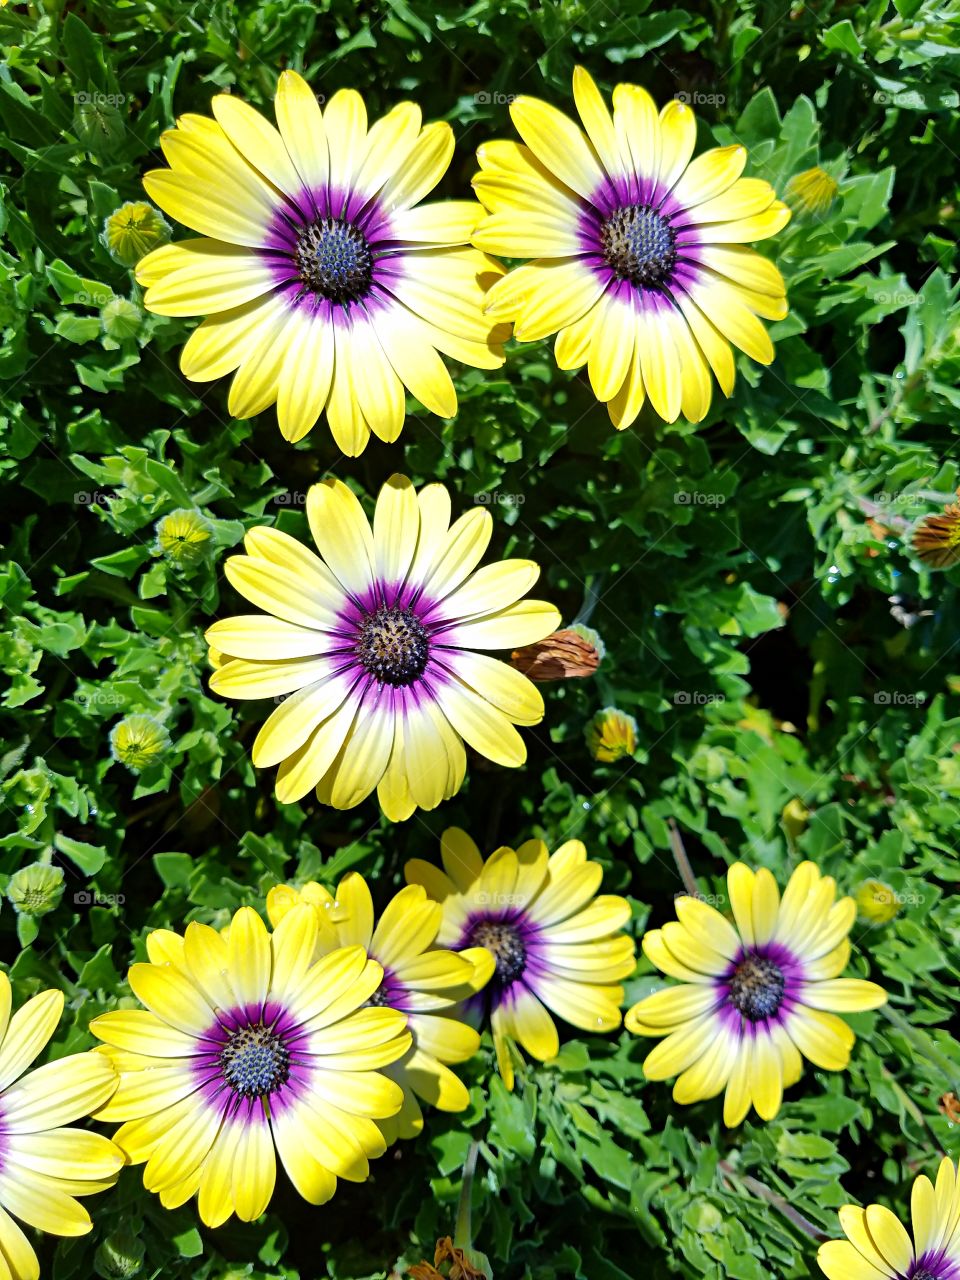 Colorful yellow & purple daisies!